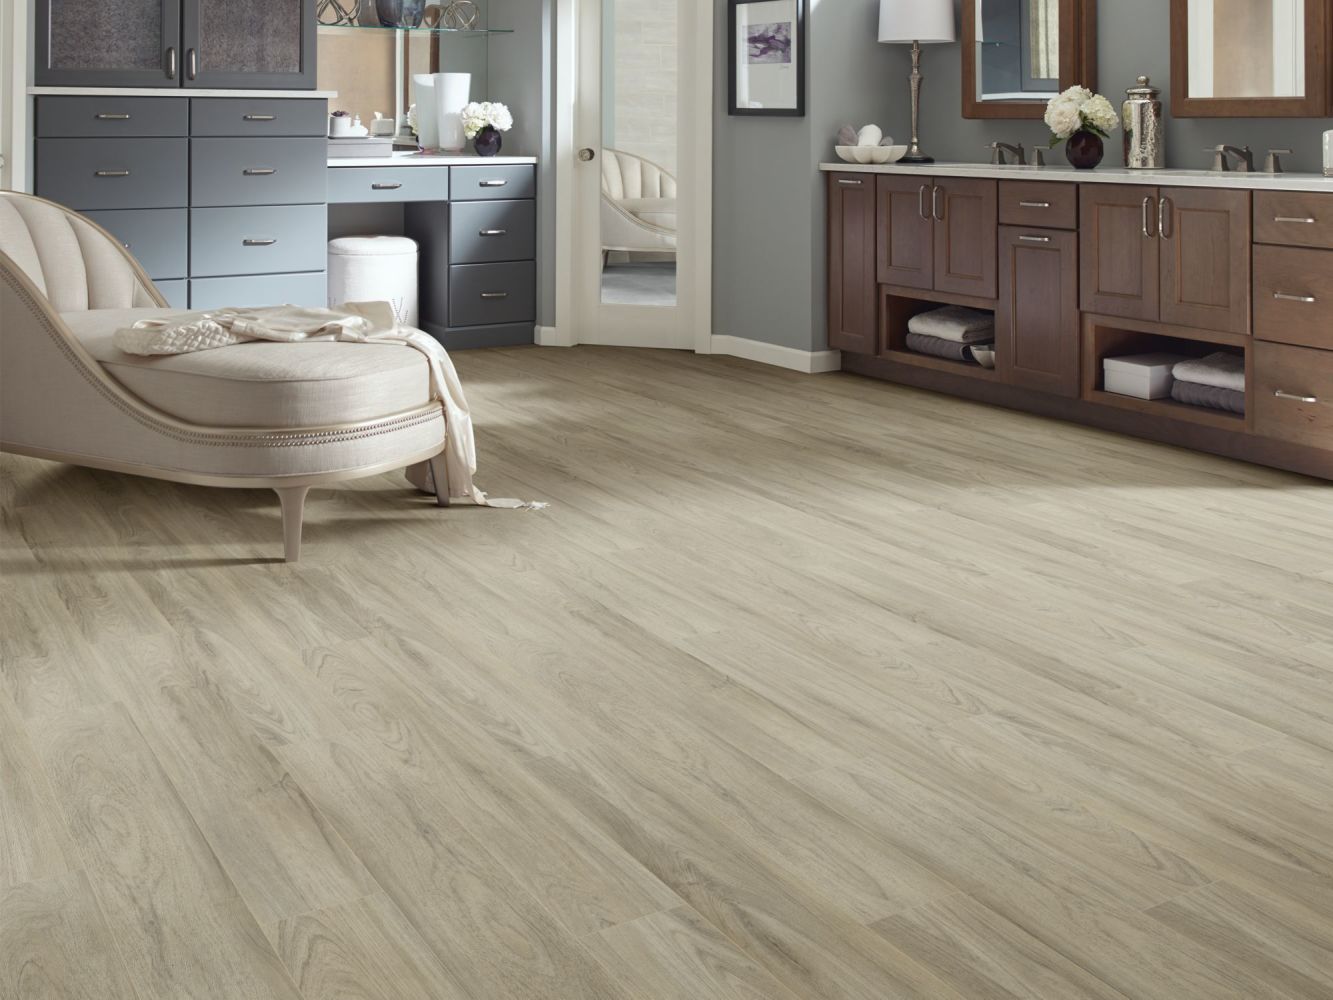 Shaw Floors Resilient Property Solutions Supino HD Plus Pisa 01027_VE231